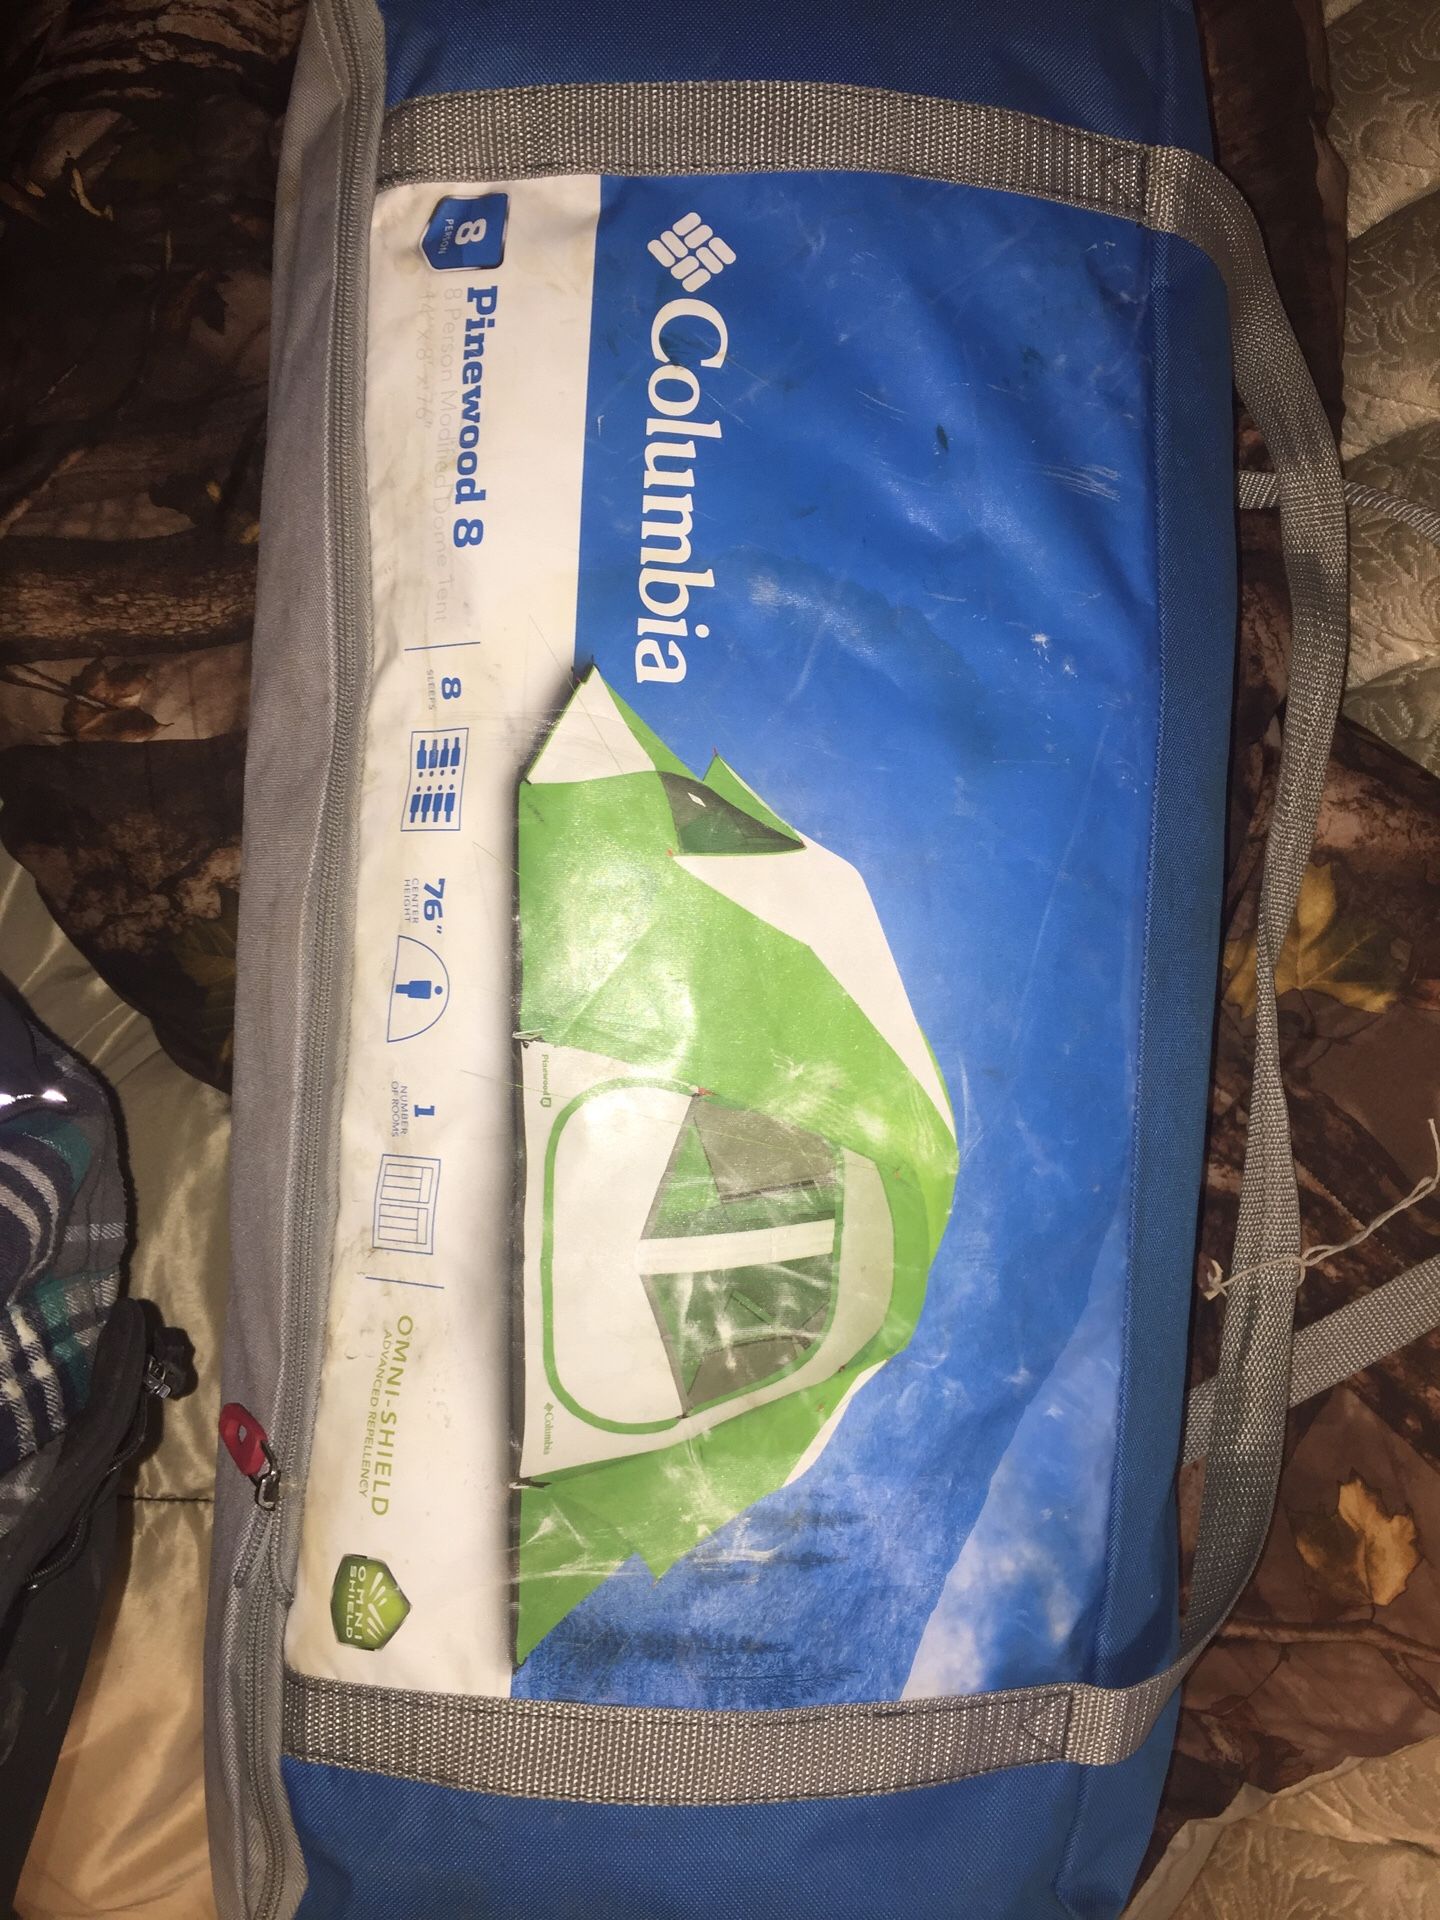 Columbia pinewood 8 tent never set up I opened it to see if it was all there packed it up make offer cheap